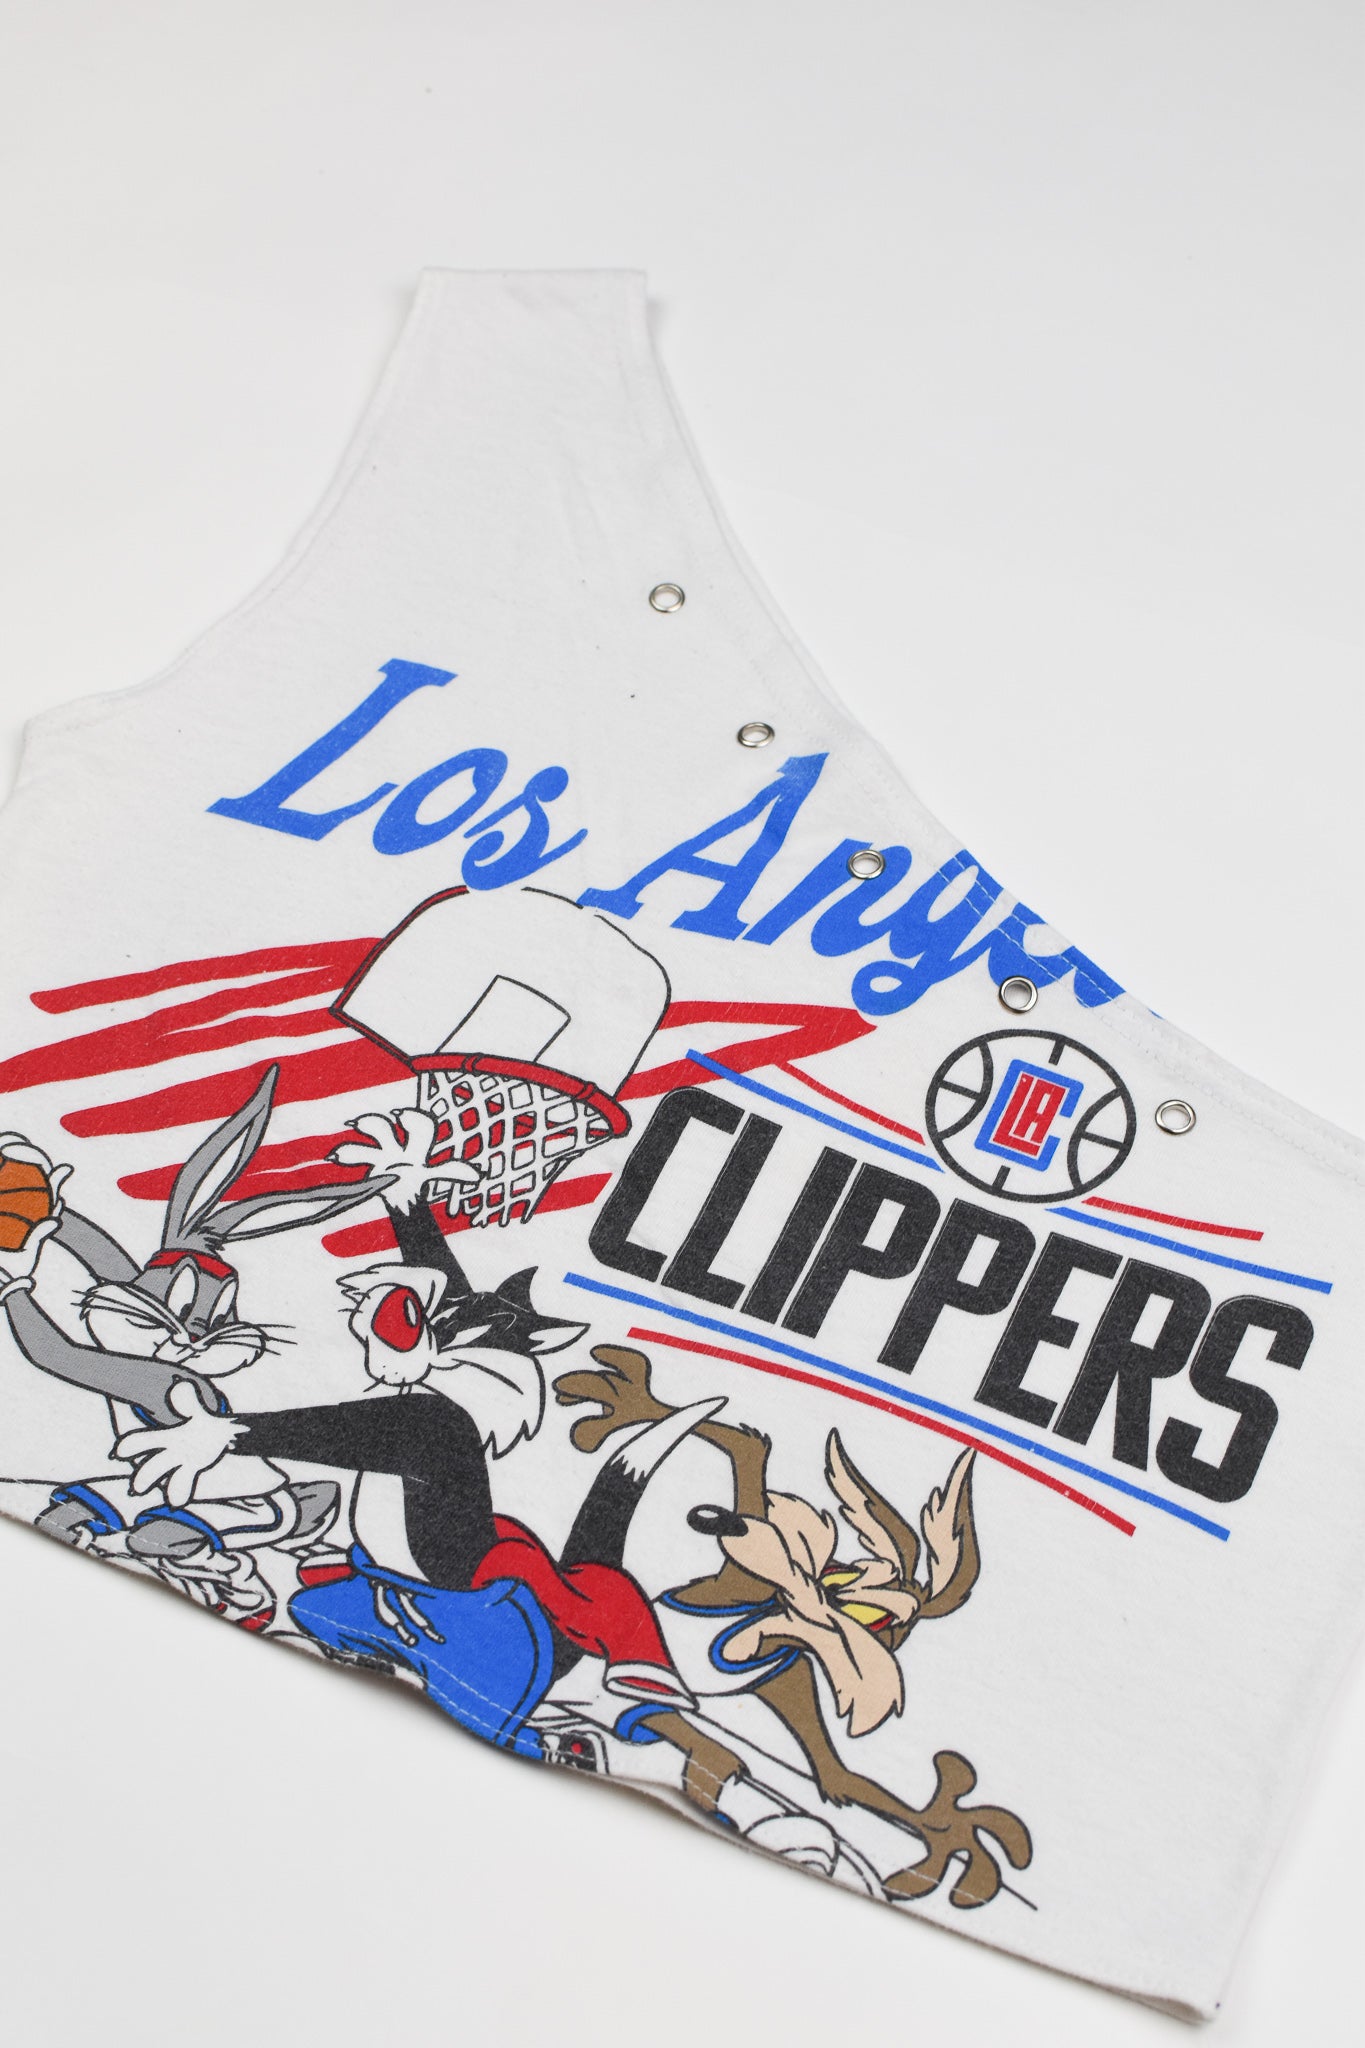 Upcycled Clippers One Shoulder Tank Top